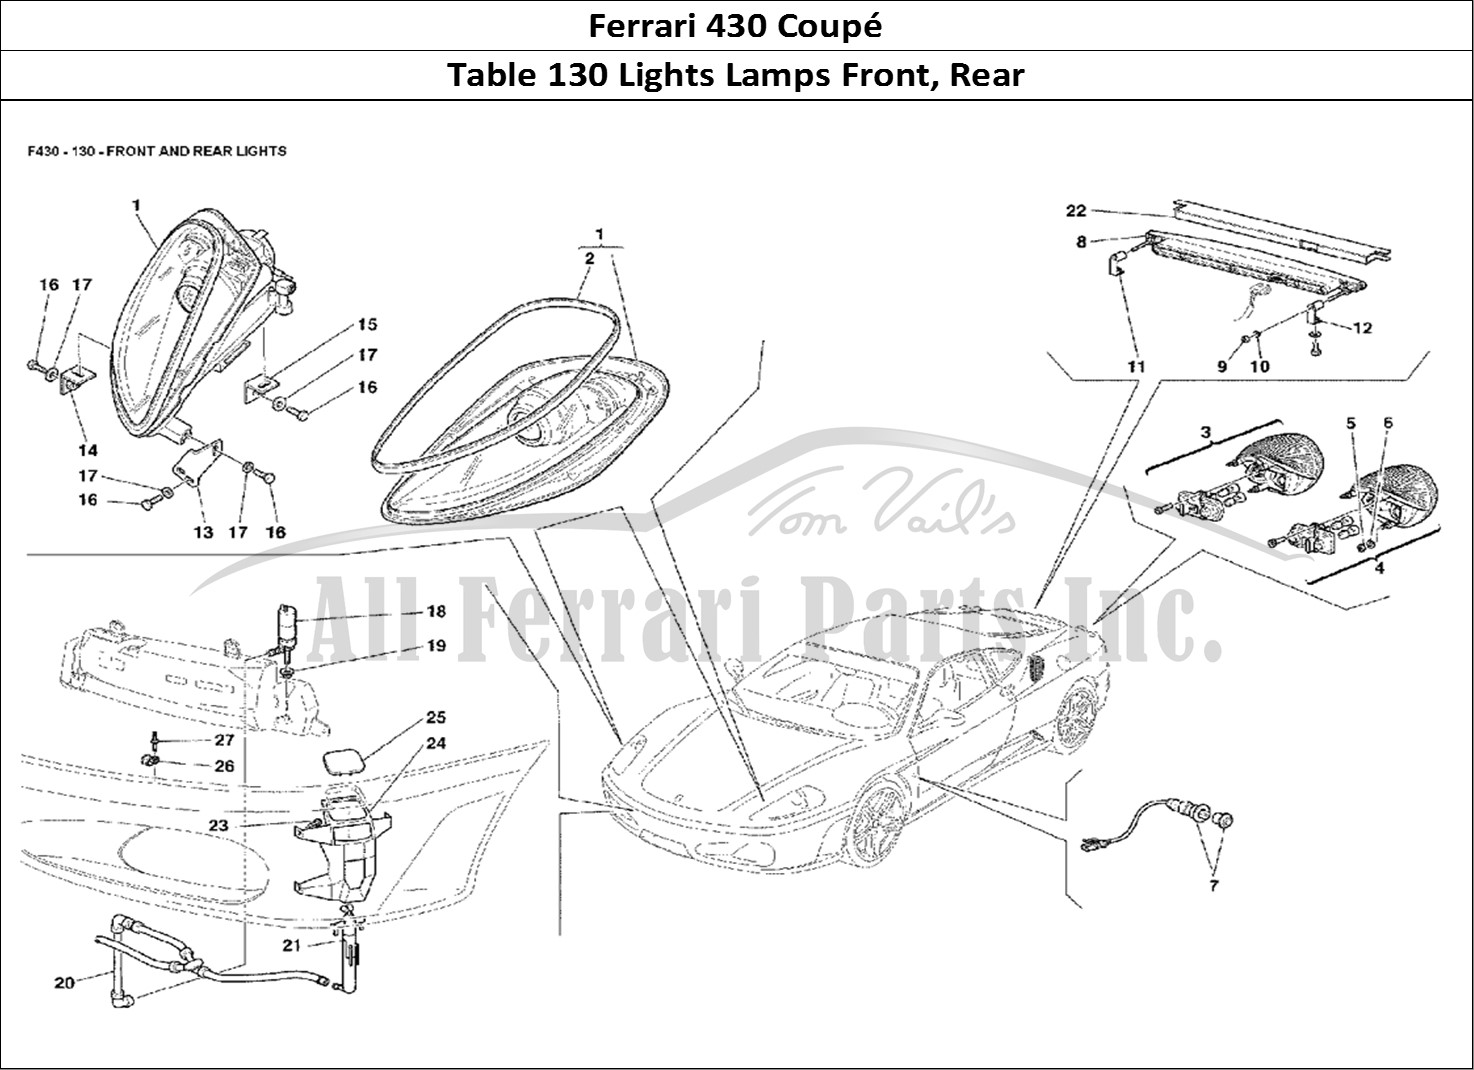 Ferrari Parts Ferrari 430 Coup Page 130 Front and Rear Lights